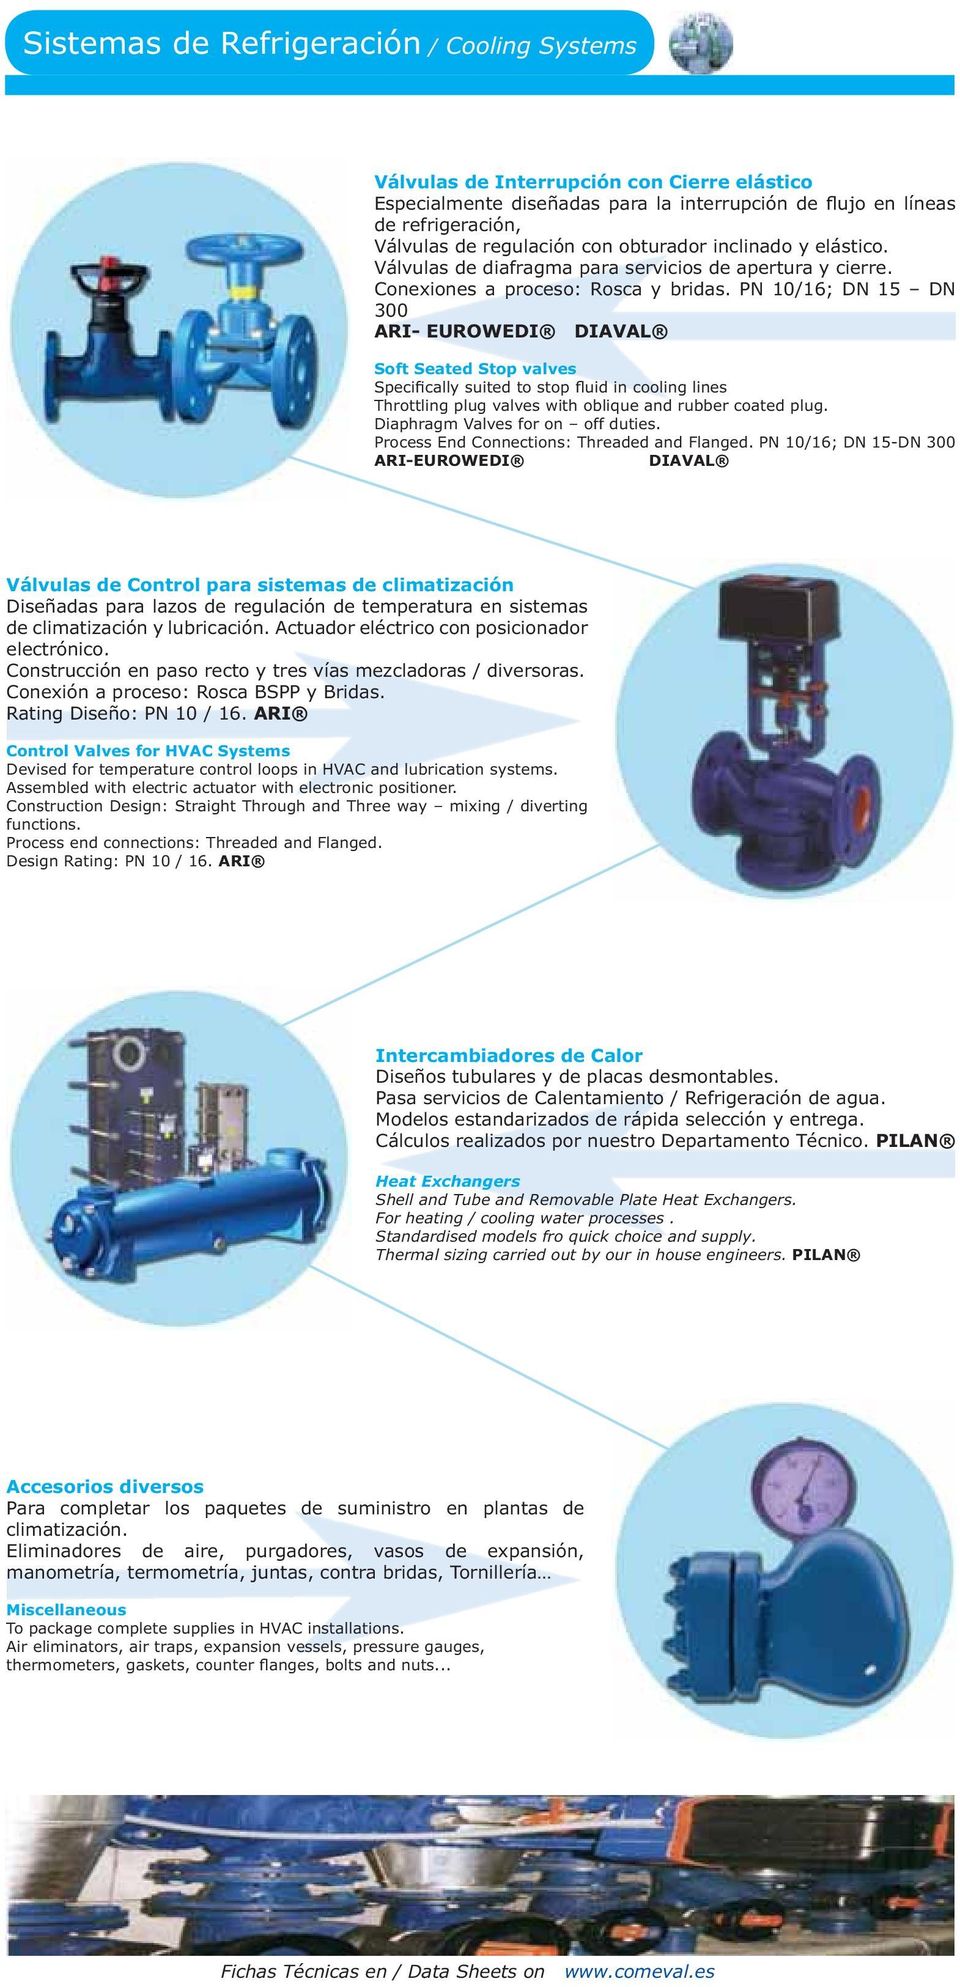 PN 10/16; DN 15 DN 300 ARI- EUROWEDI DIAVAL Soft Seated Stop valves Specifically suited to stop fluid in cooling lines Throttling plug valves with oblique and rubber coated plug.